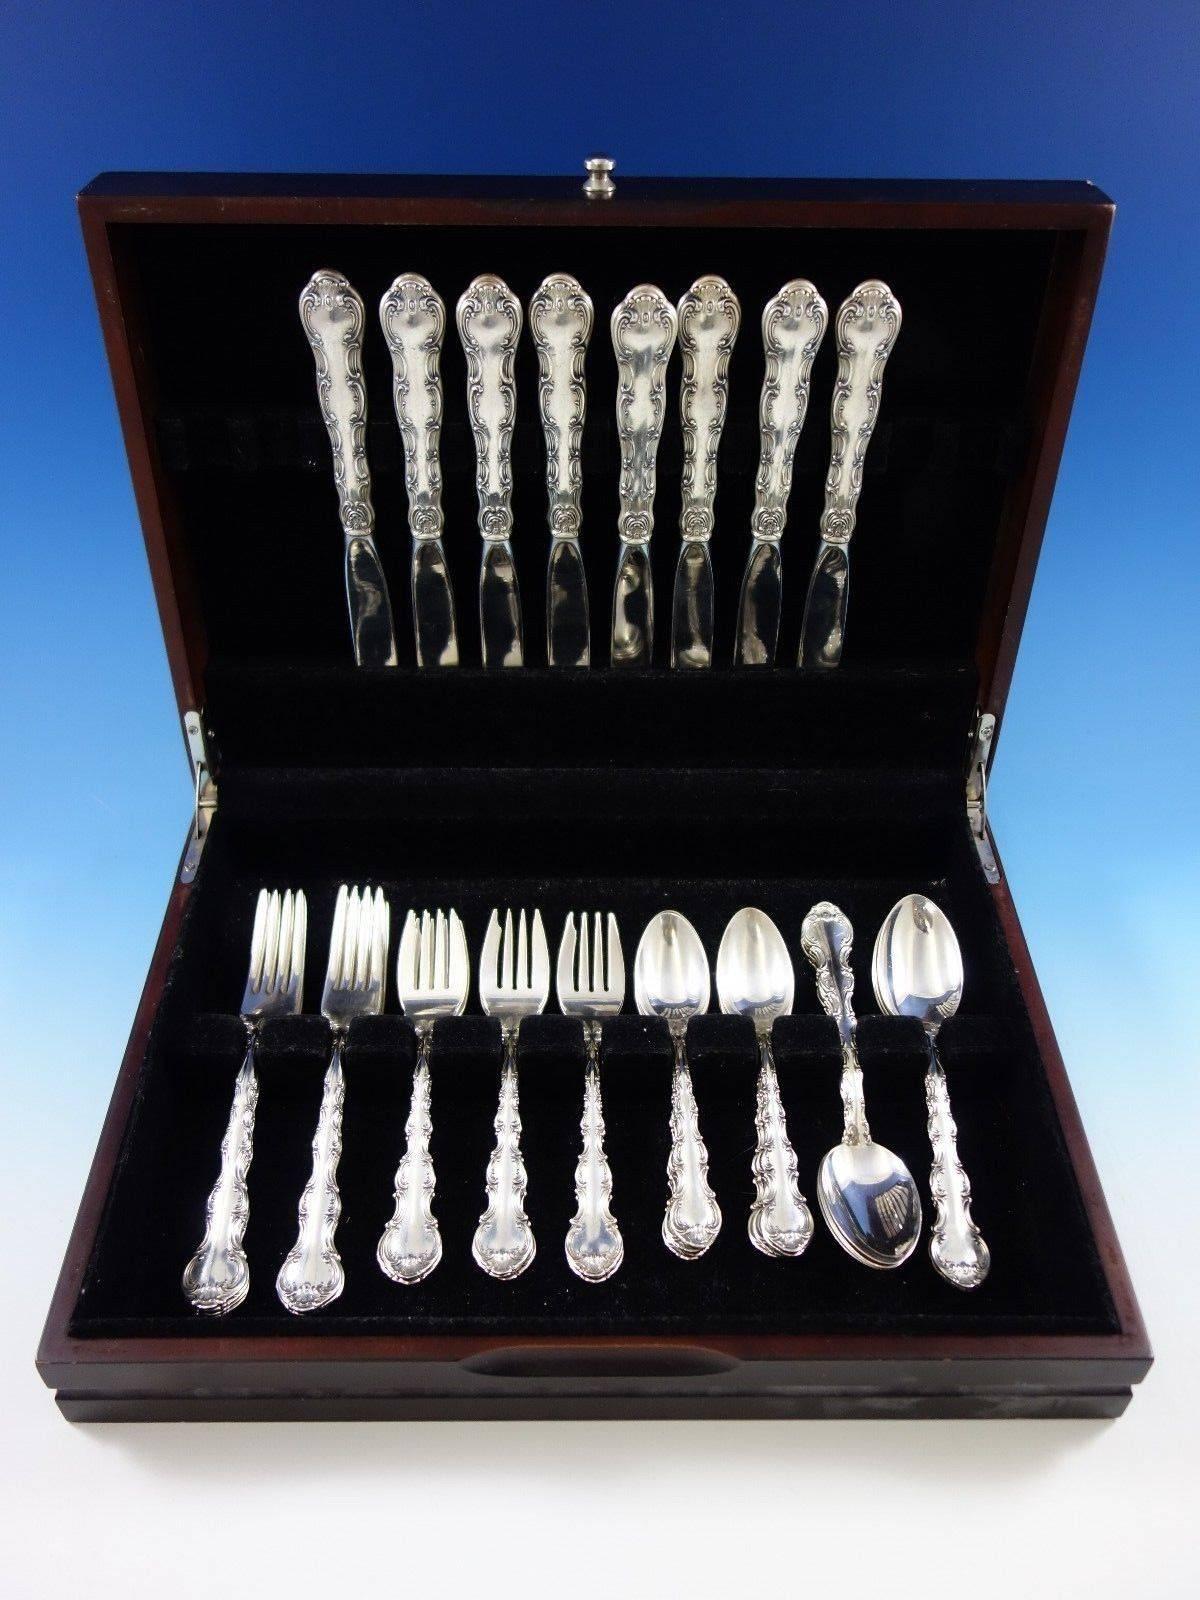 Strasbourg by Gorham sterling silver flatware set - 40 pieces. This set includes: 

eight place knives, 9 1/4